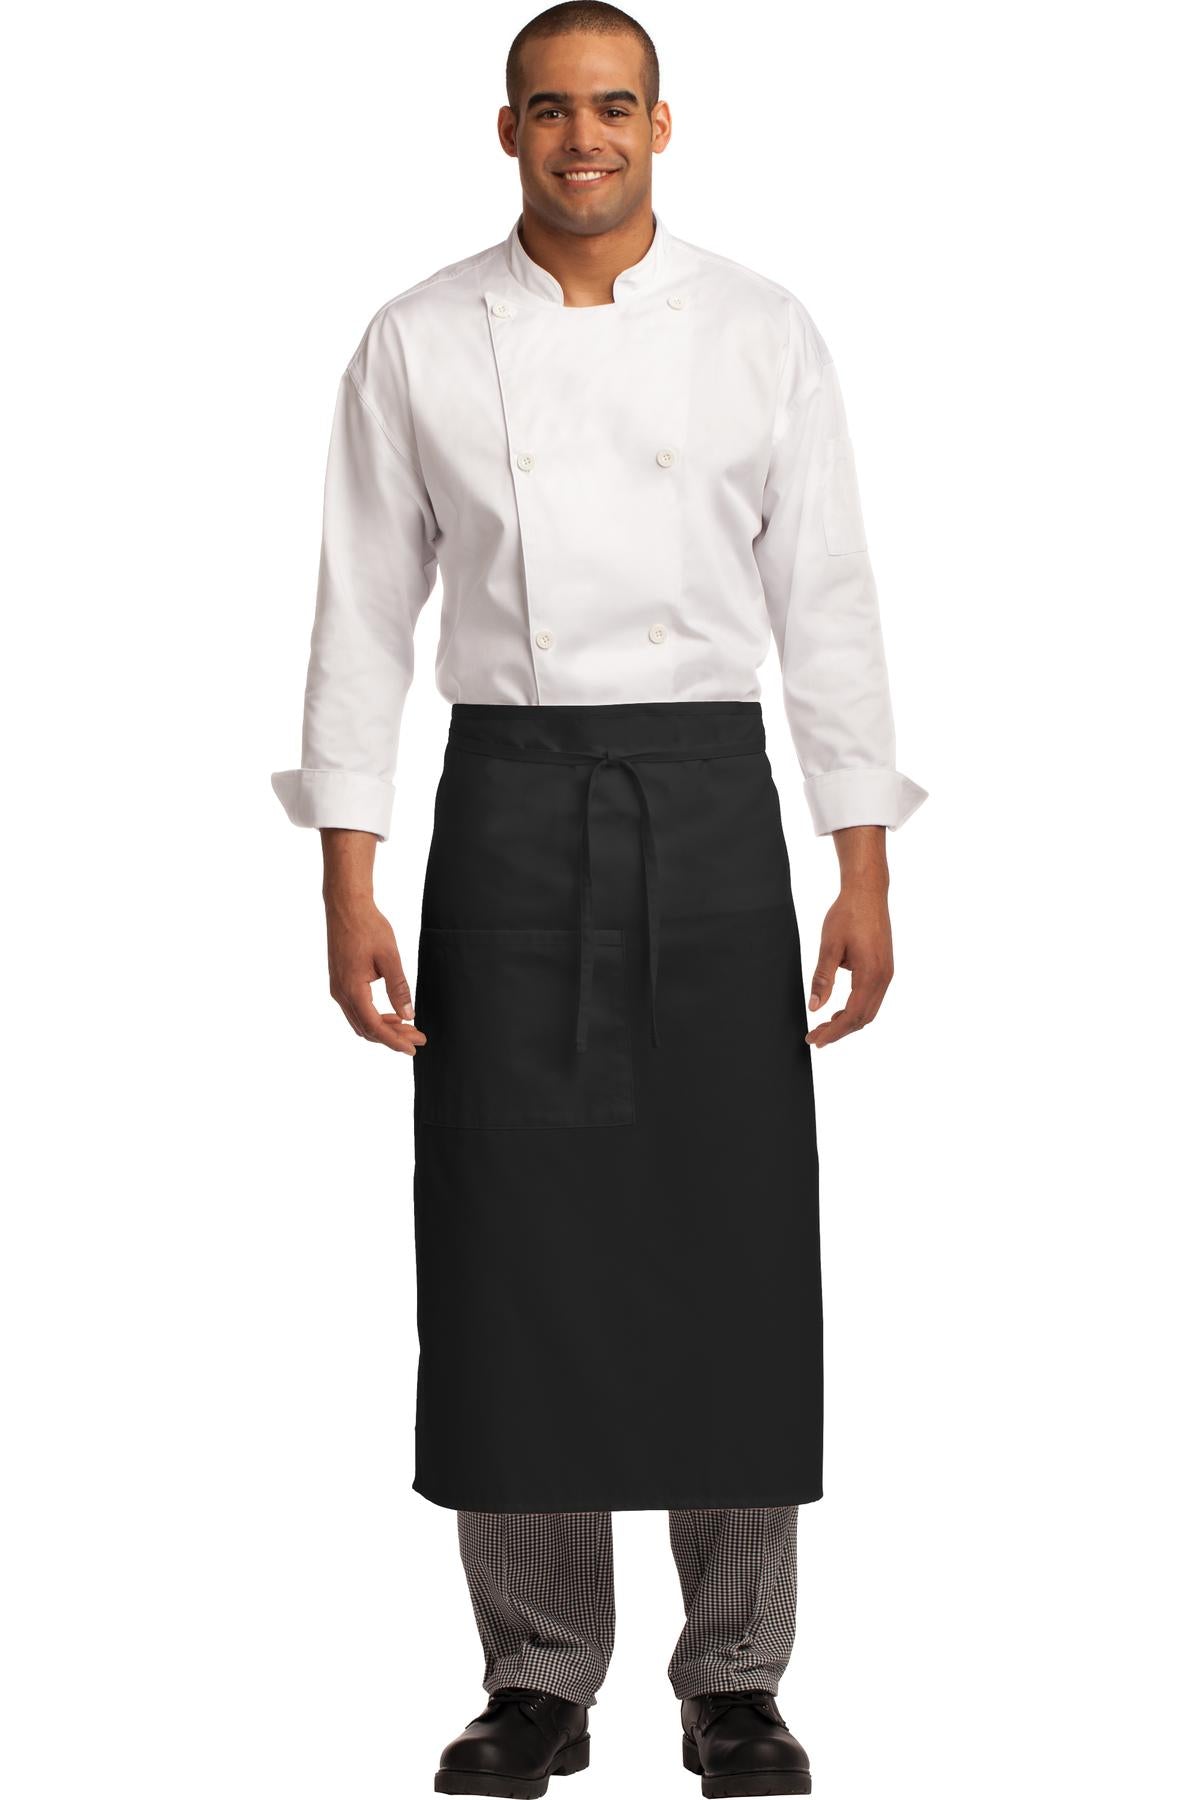 Port Authority® Easy Care Full Bistro Apron with Stain Release. A701 - DFW Impression